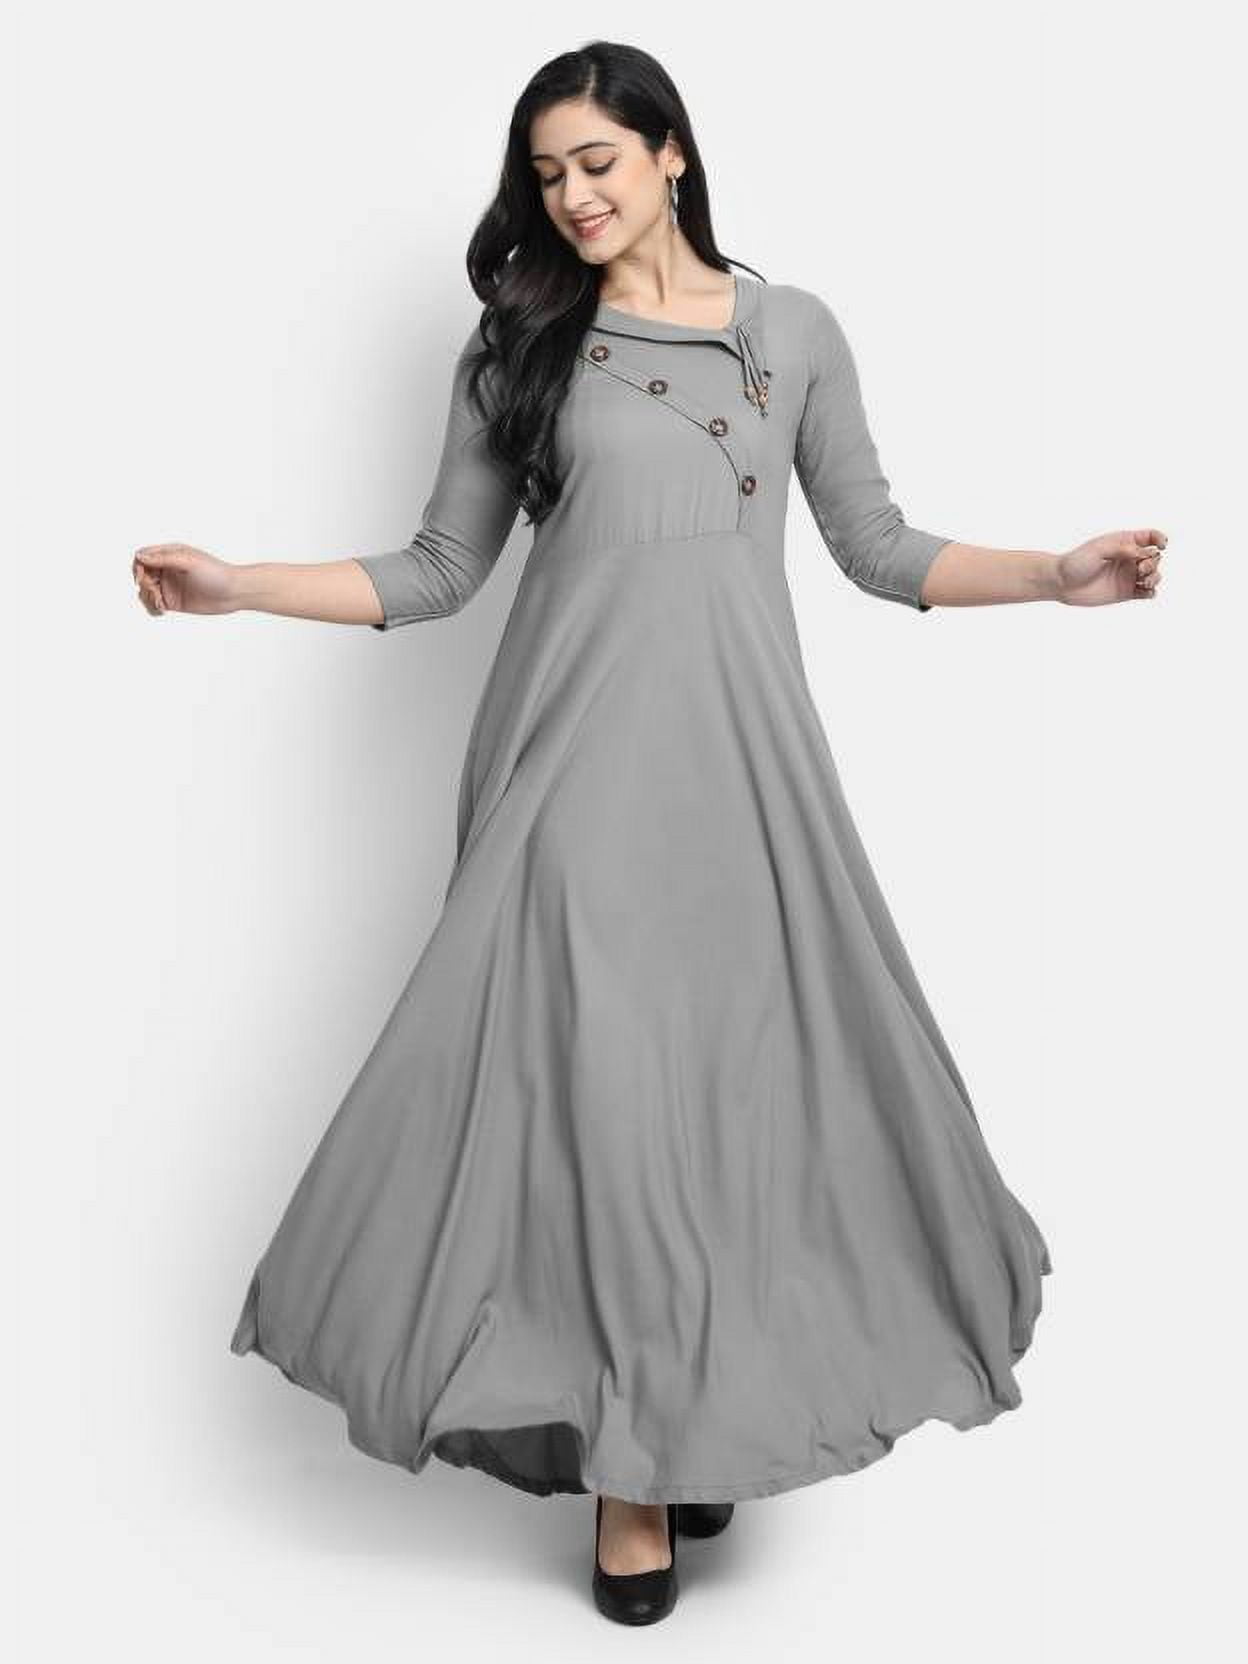 Indian You Girl with Long Maxi Dress with Elegant Pose and Expression Stock  Image - Image of pant, woman: 166570021